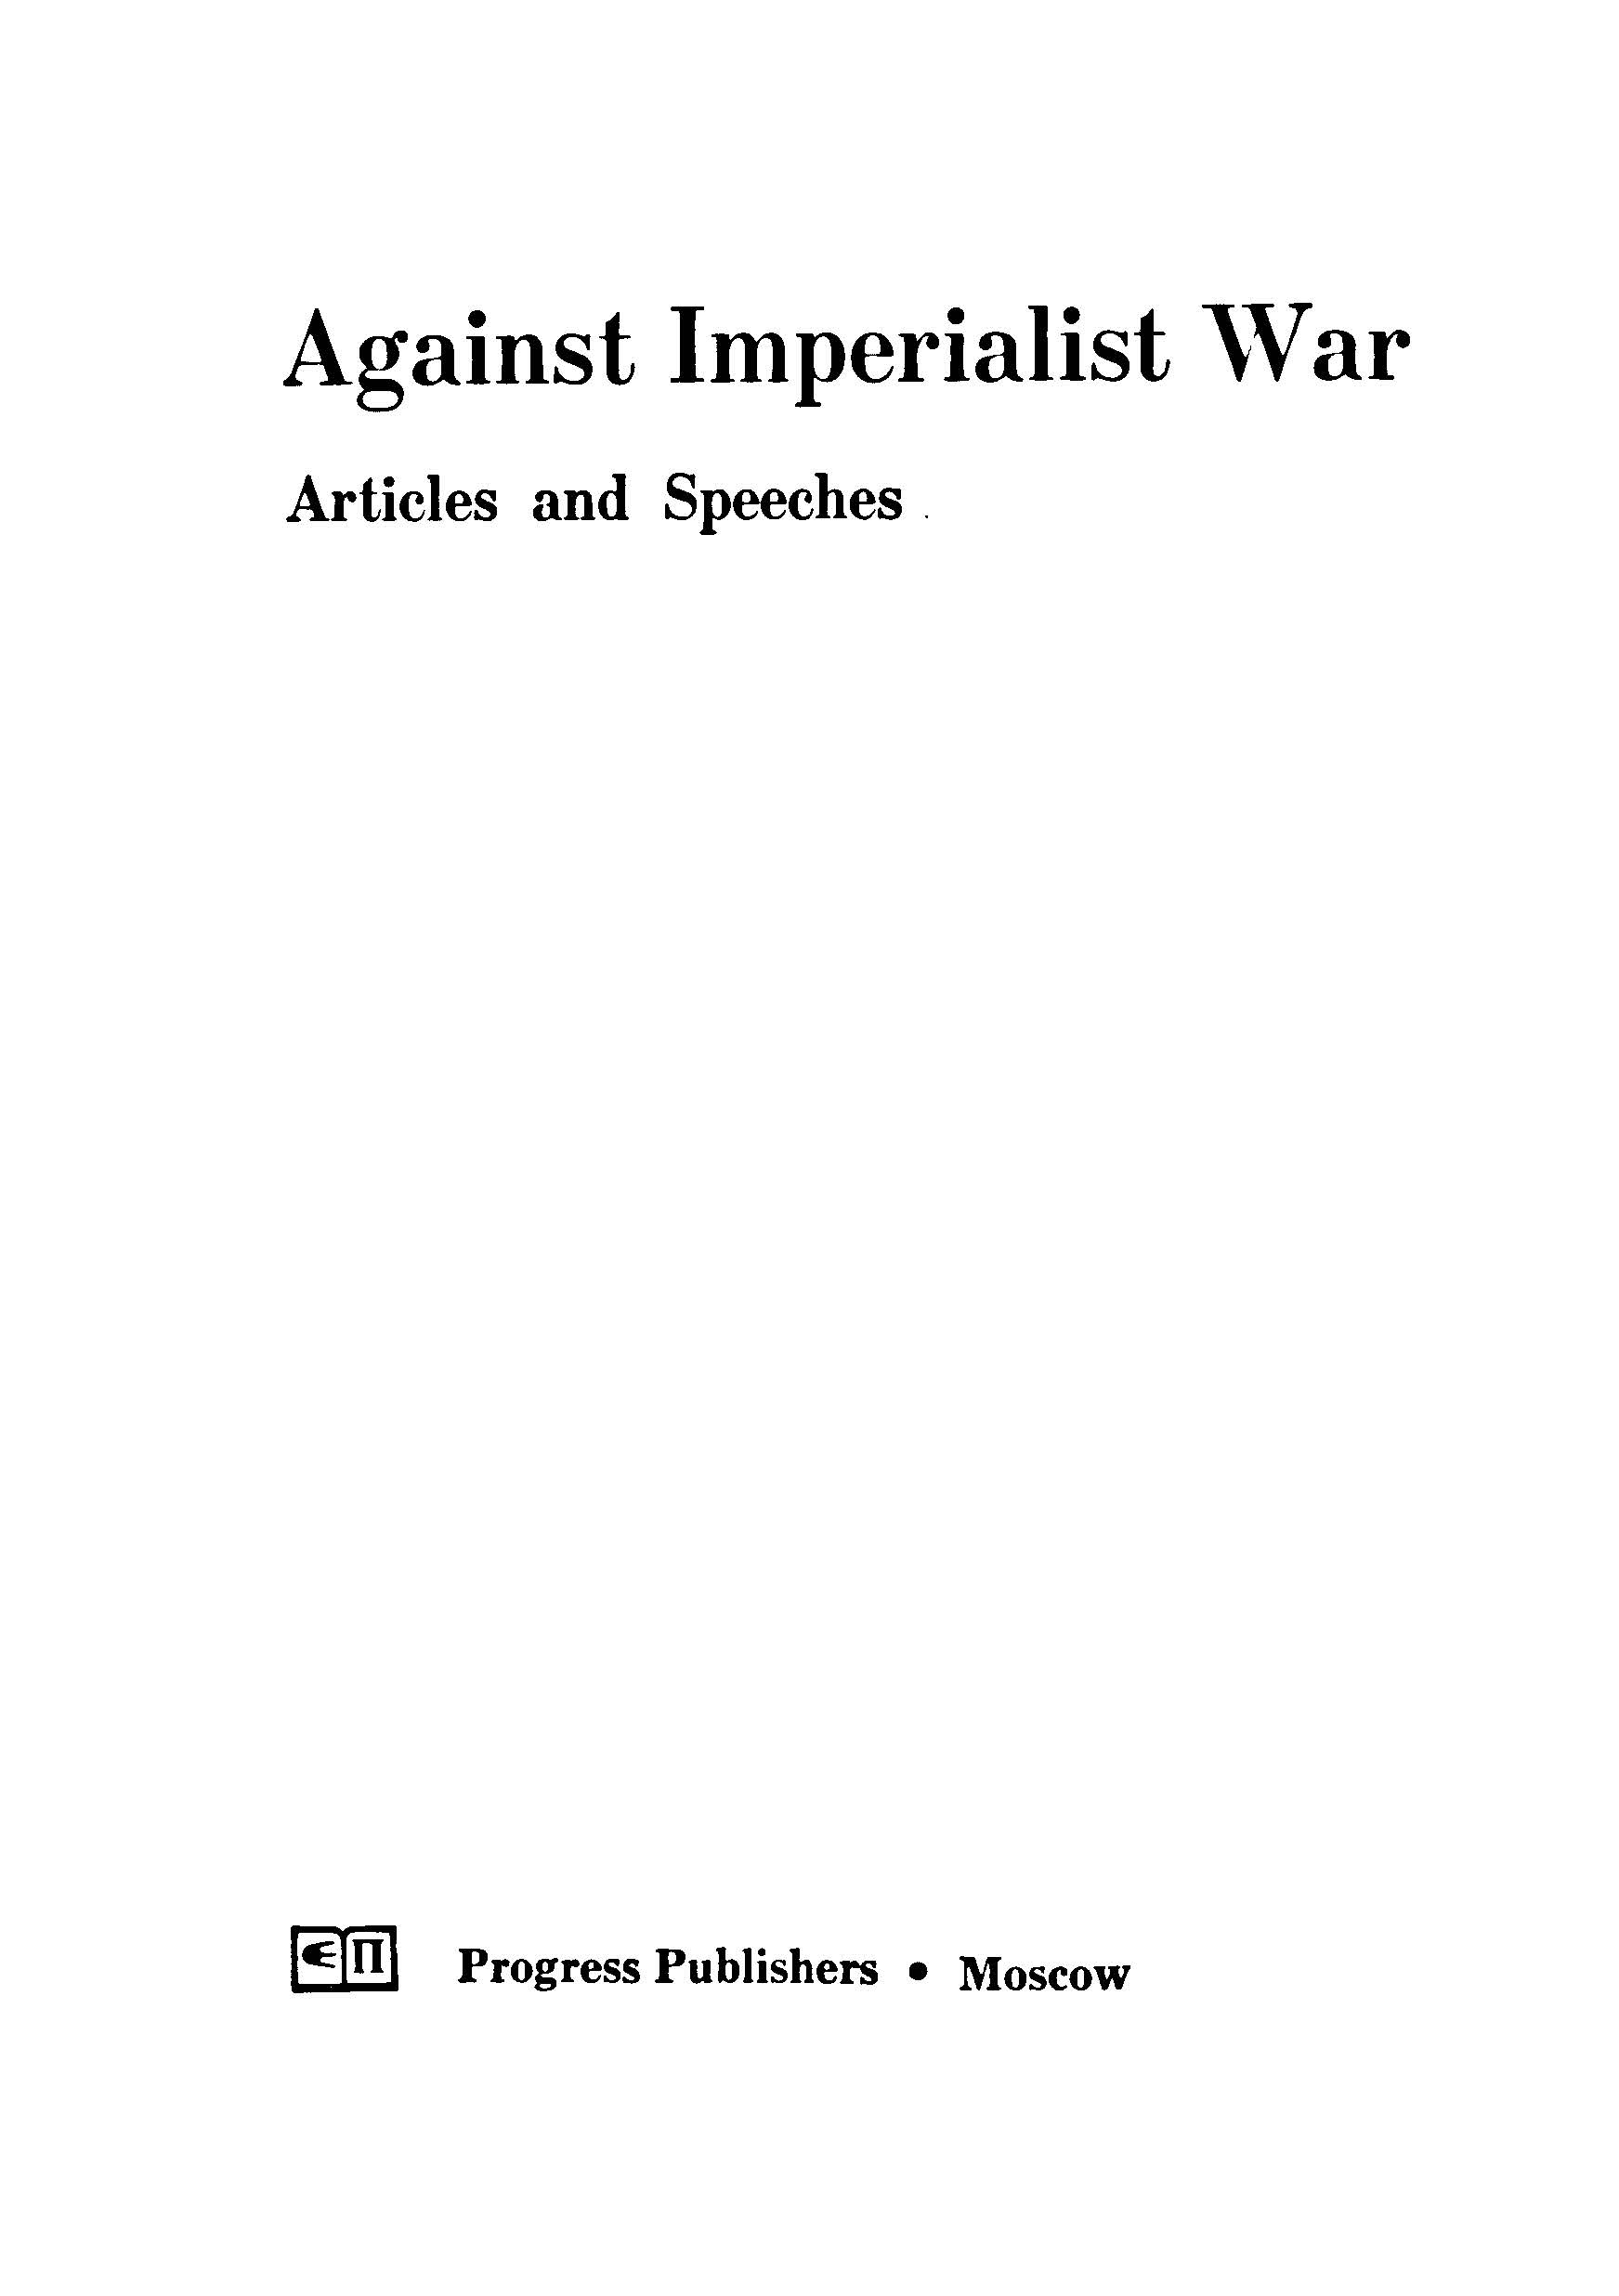 Lenin against imperialist war articles and speeches